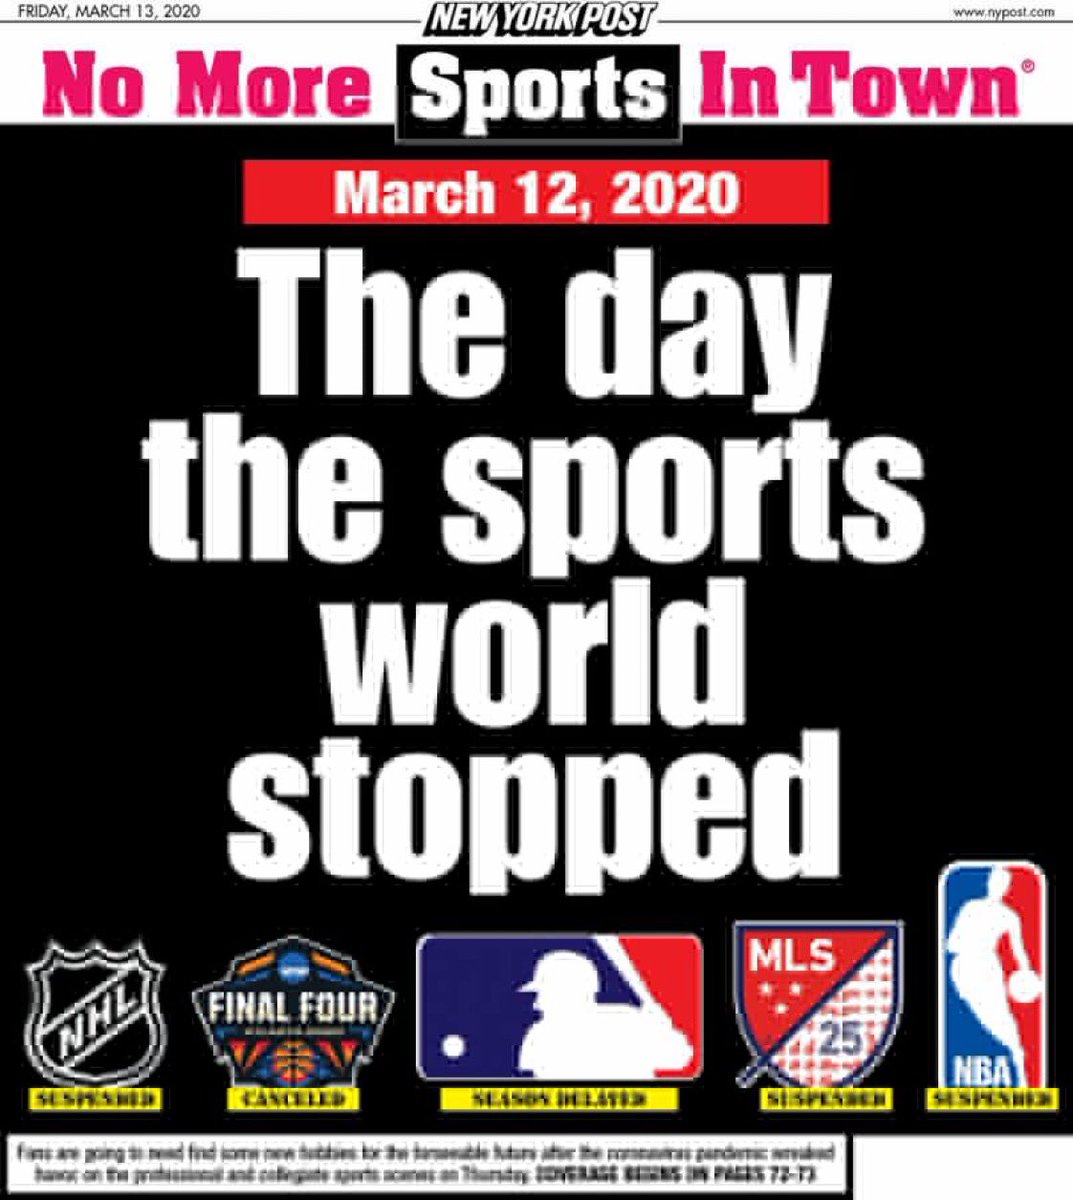 March 12, 2020: The Day the Sports World StoppedI'm sure there will be a 30 for 30 on this in the future, but I already miss sports. I'm gonna post a sports GIF or video every day until sports return.